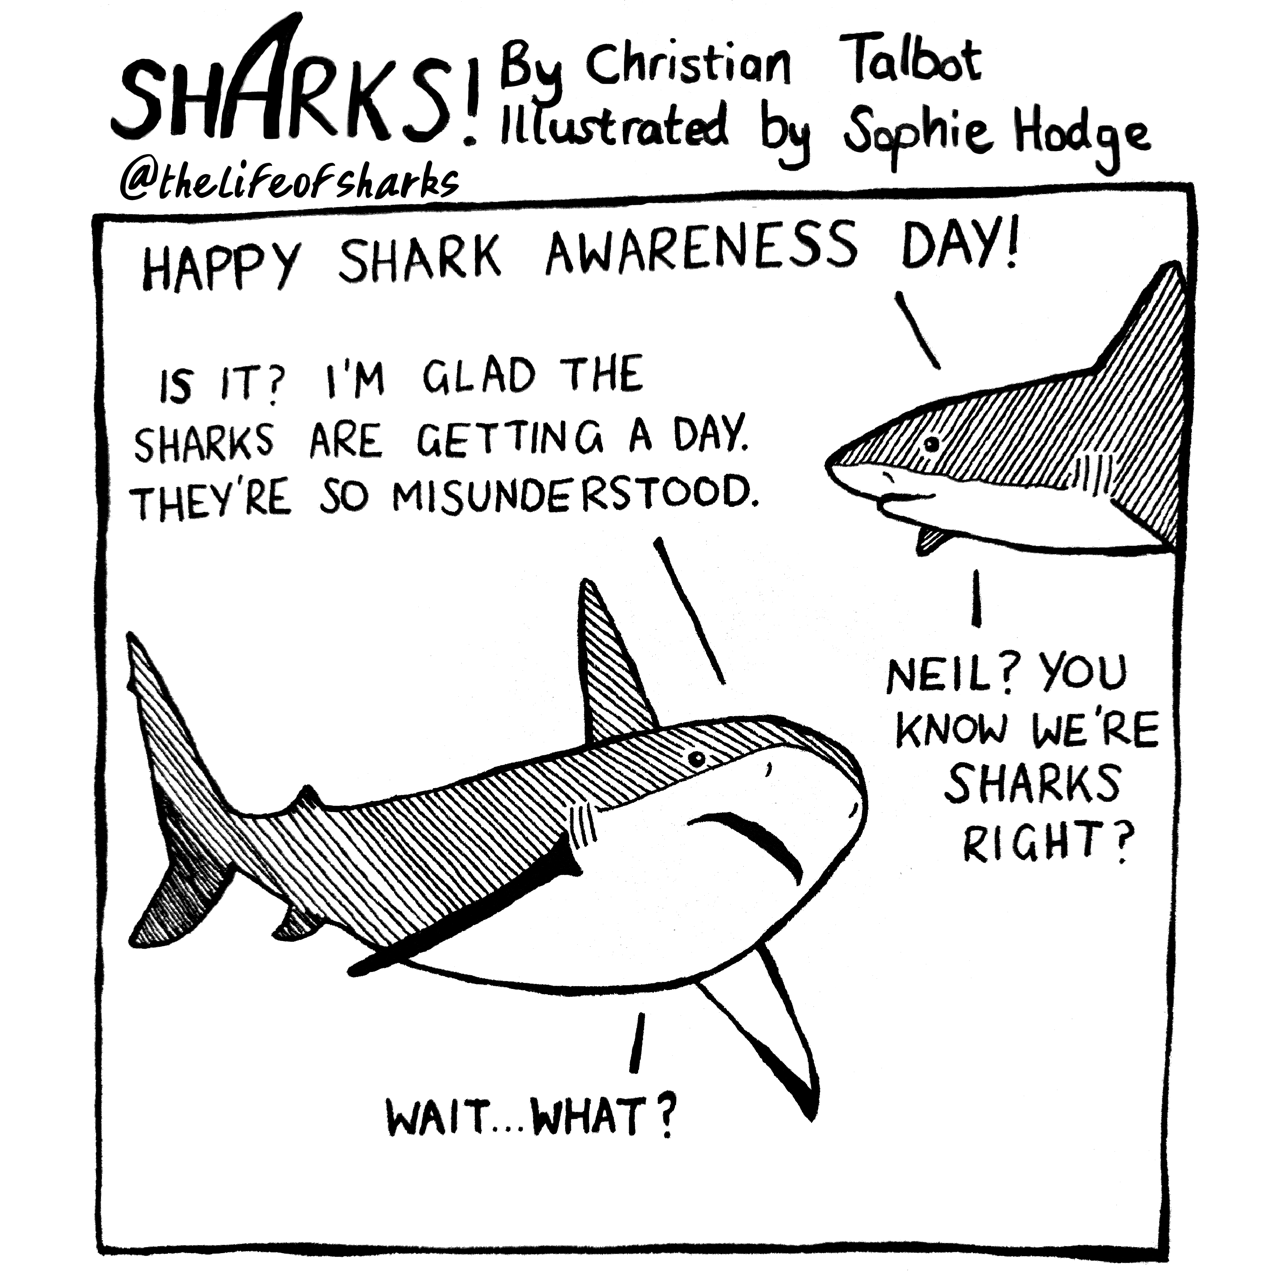 Being a shark for the day